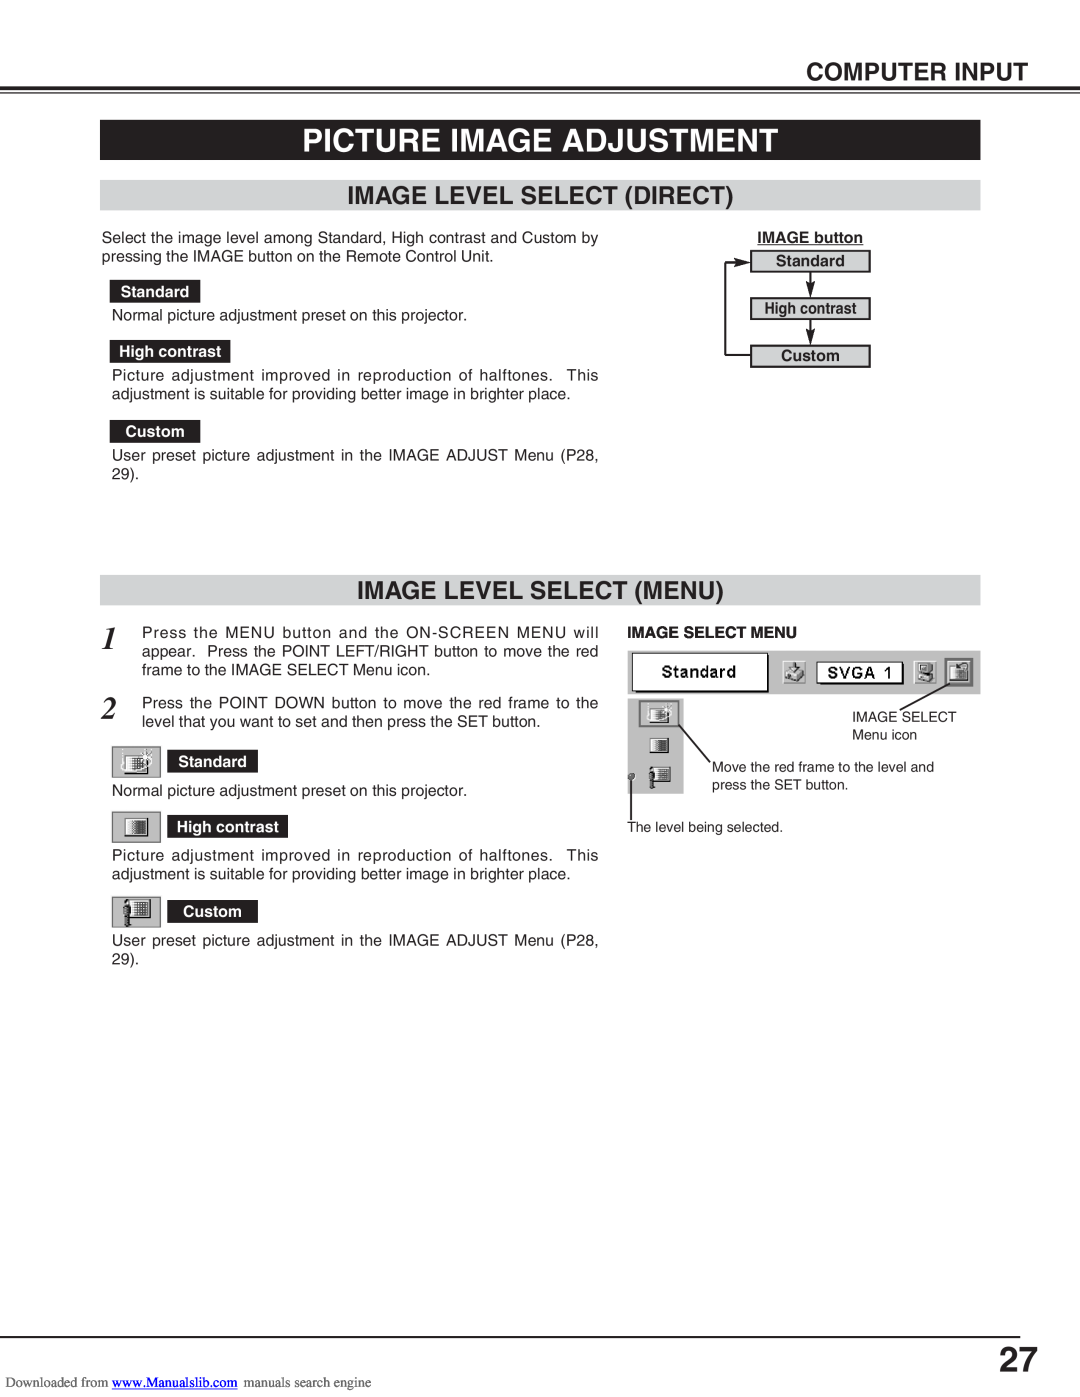 Canon LV-S2 owner manual Picture Image Adjustment, Image Level Select Direct, Image Level Select Menu, Computer Input 